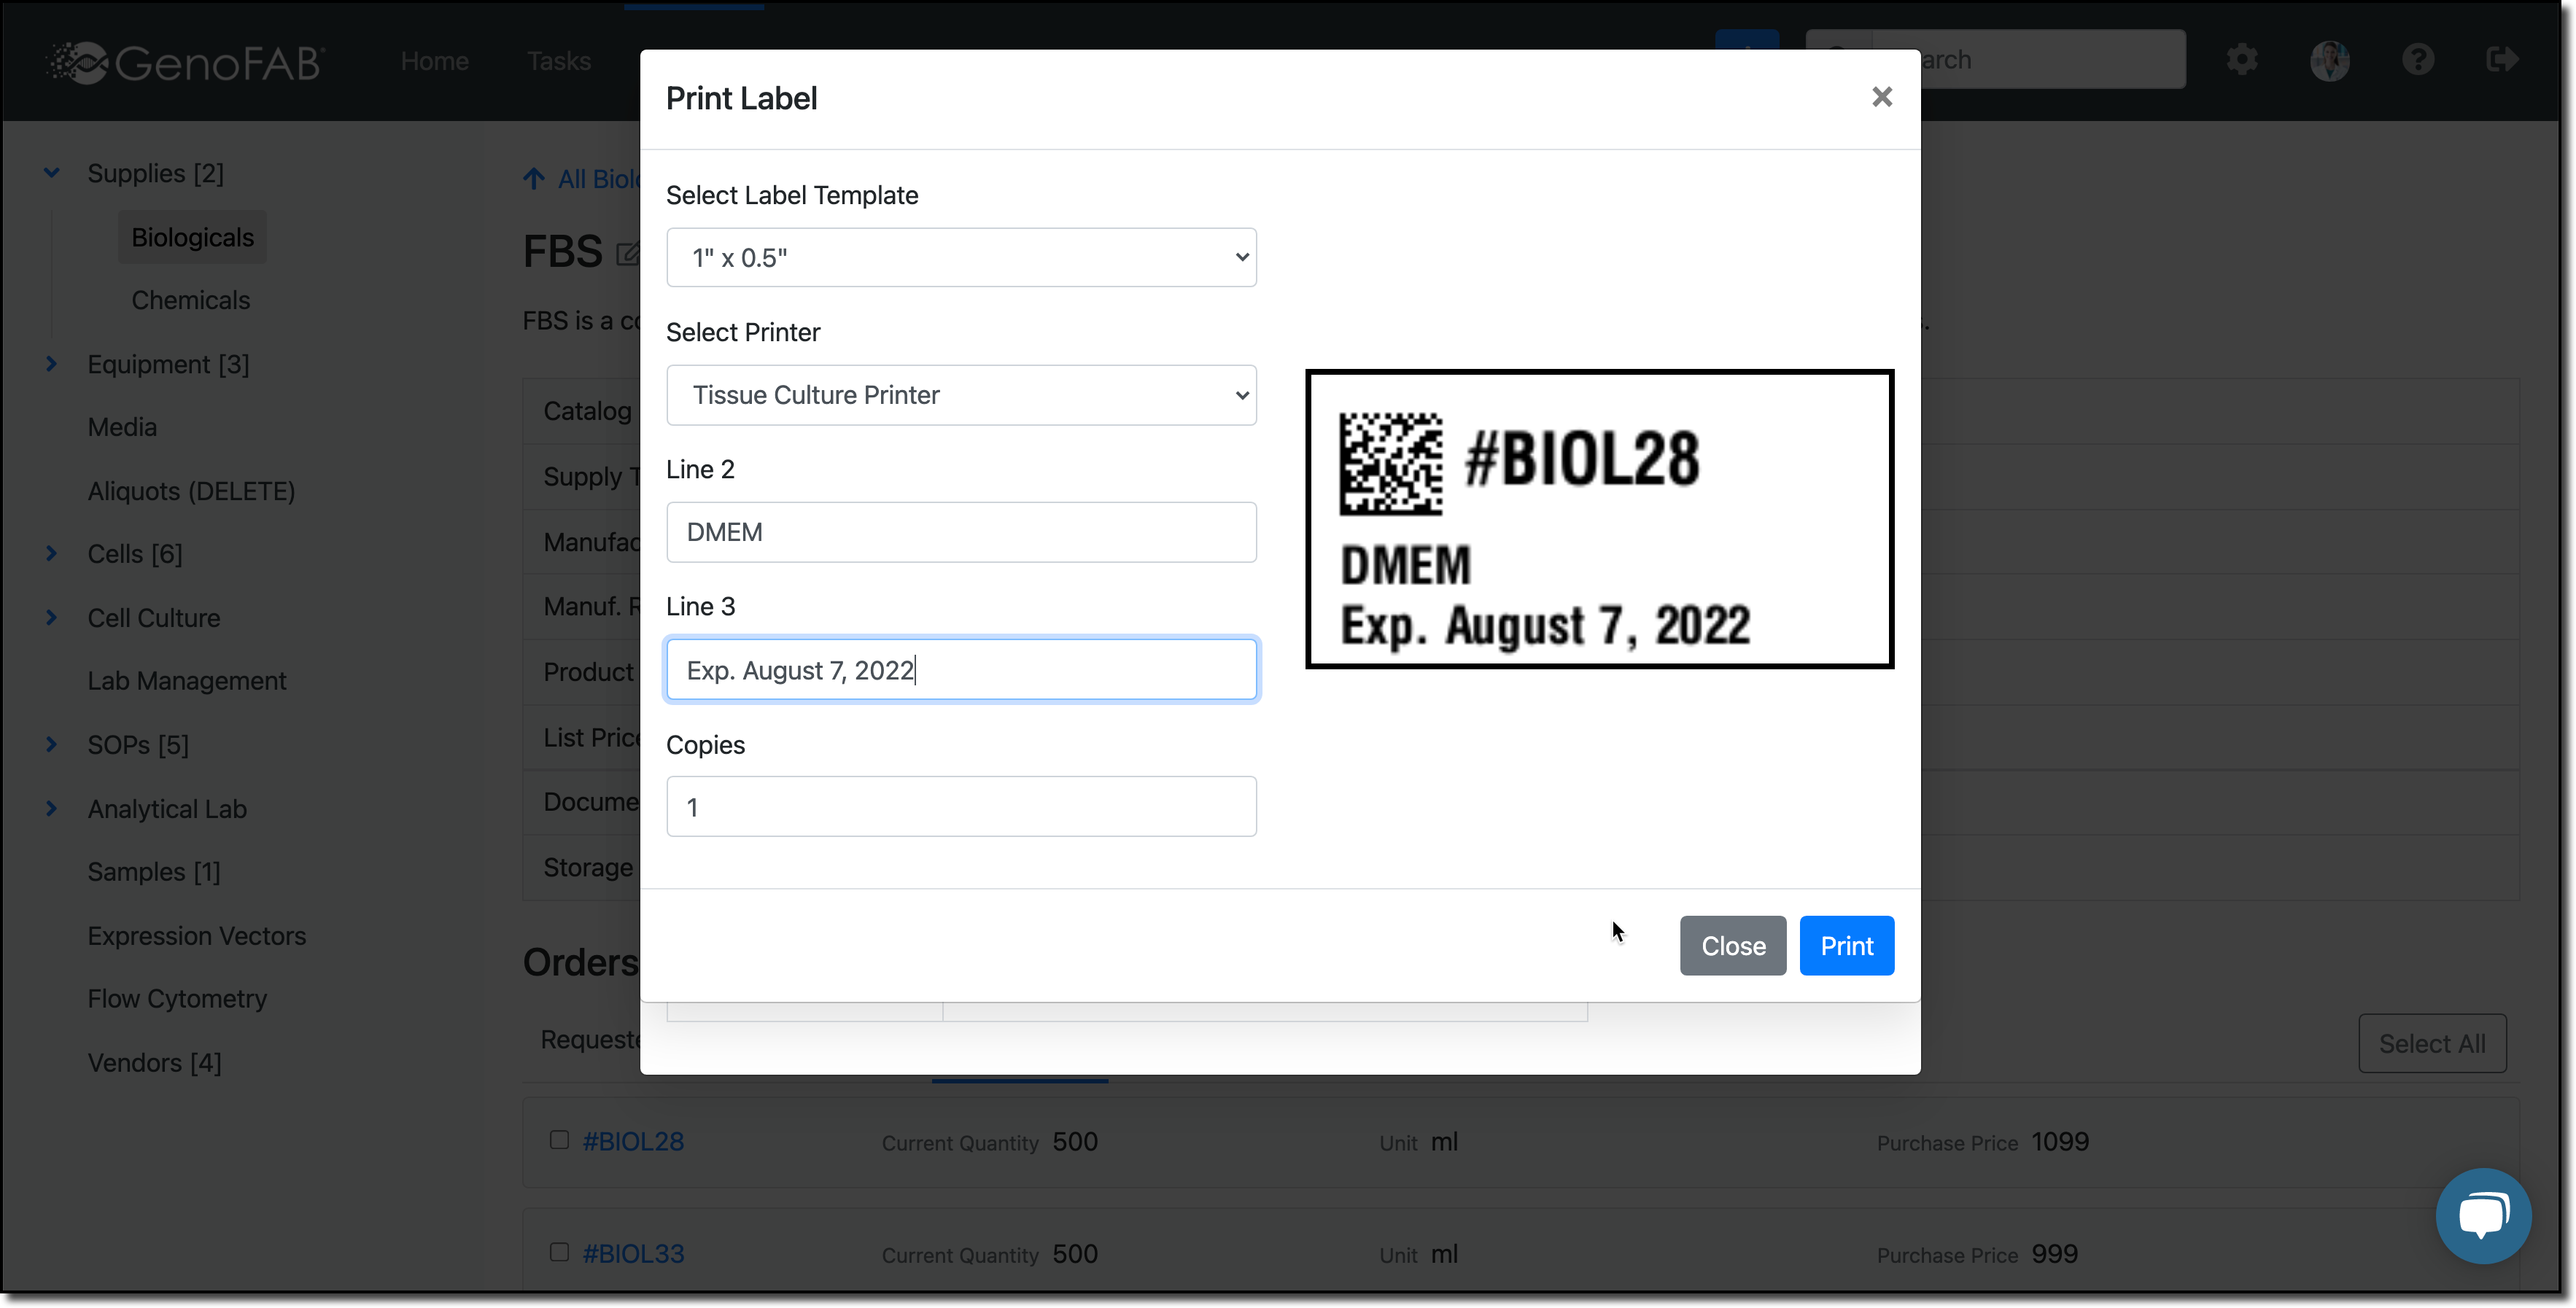 Print a barcoded label to identify a sample